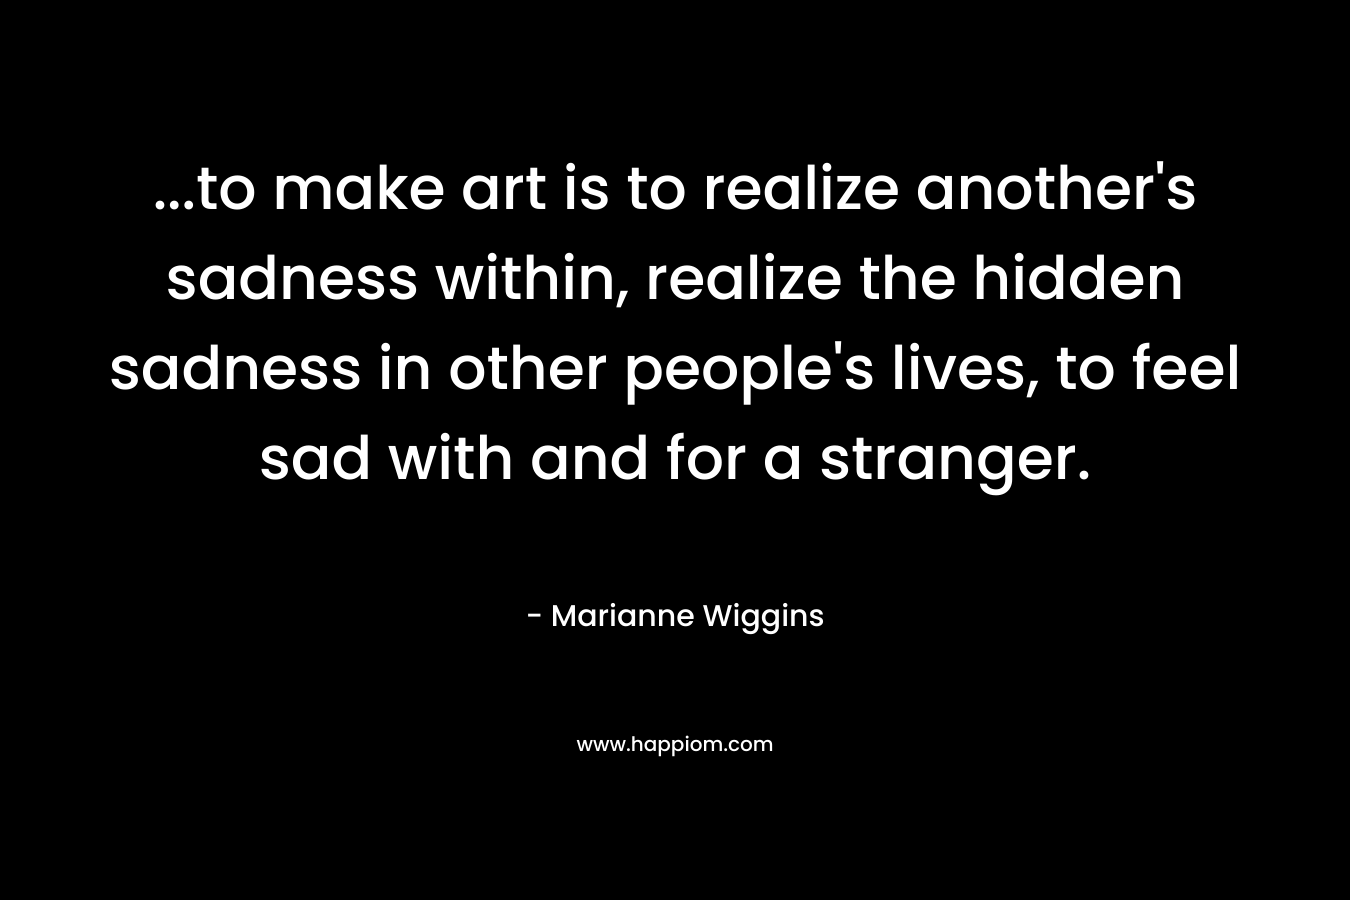 ...to make art is to realize another's sadness within, realize the hidden sadness in other people's lives, to feel sad with and for a stranger.